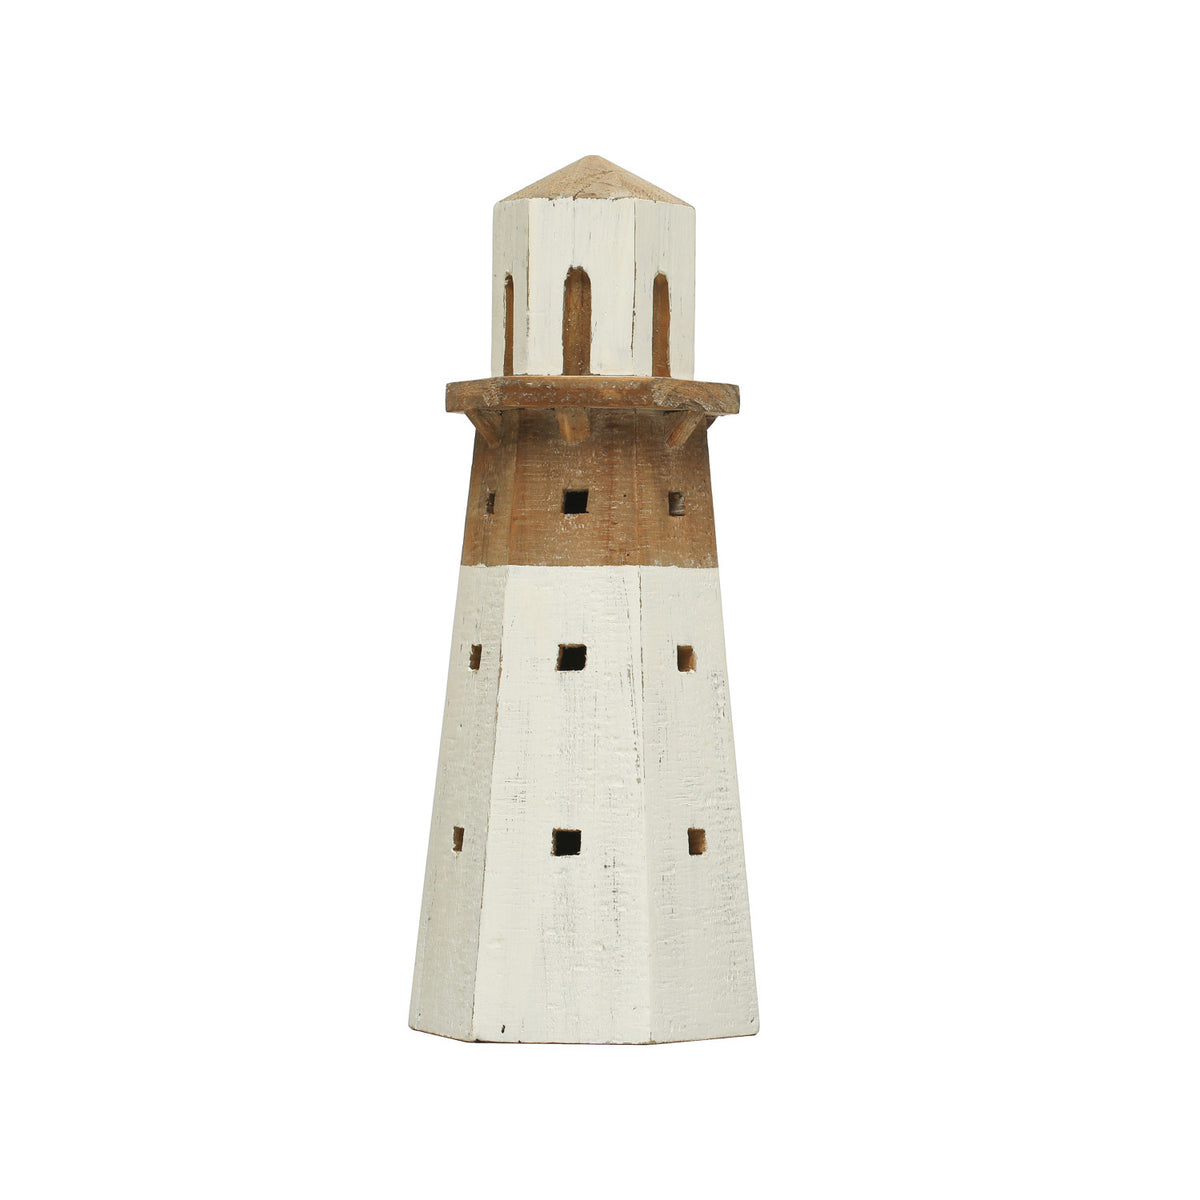 13.75"H Wood Lighthouse, White & Natural